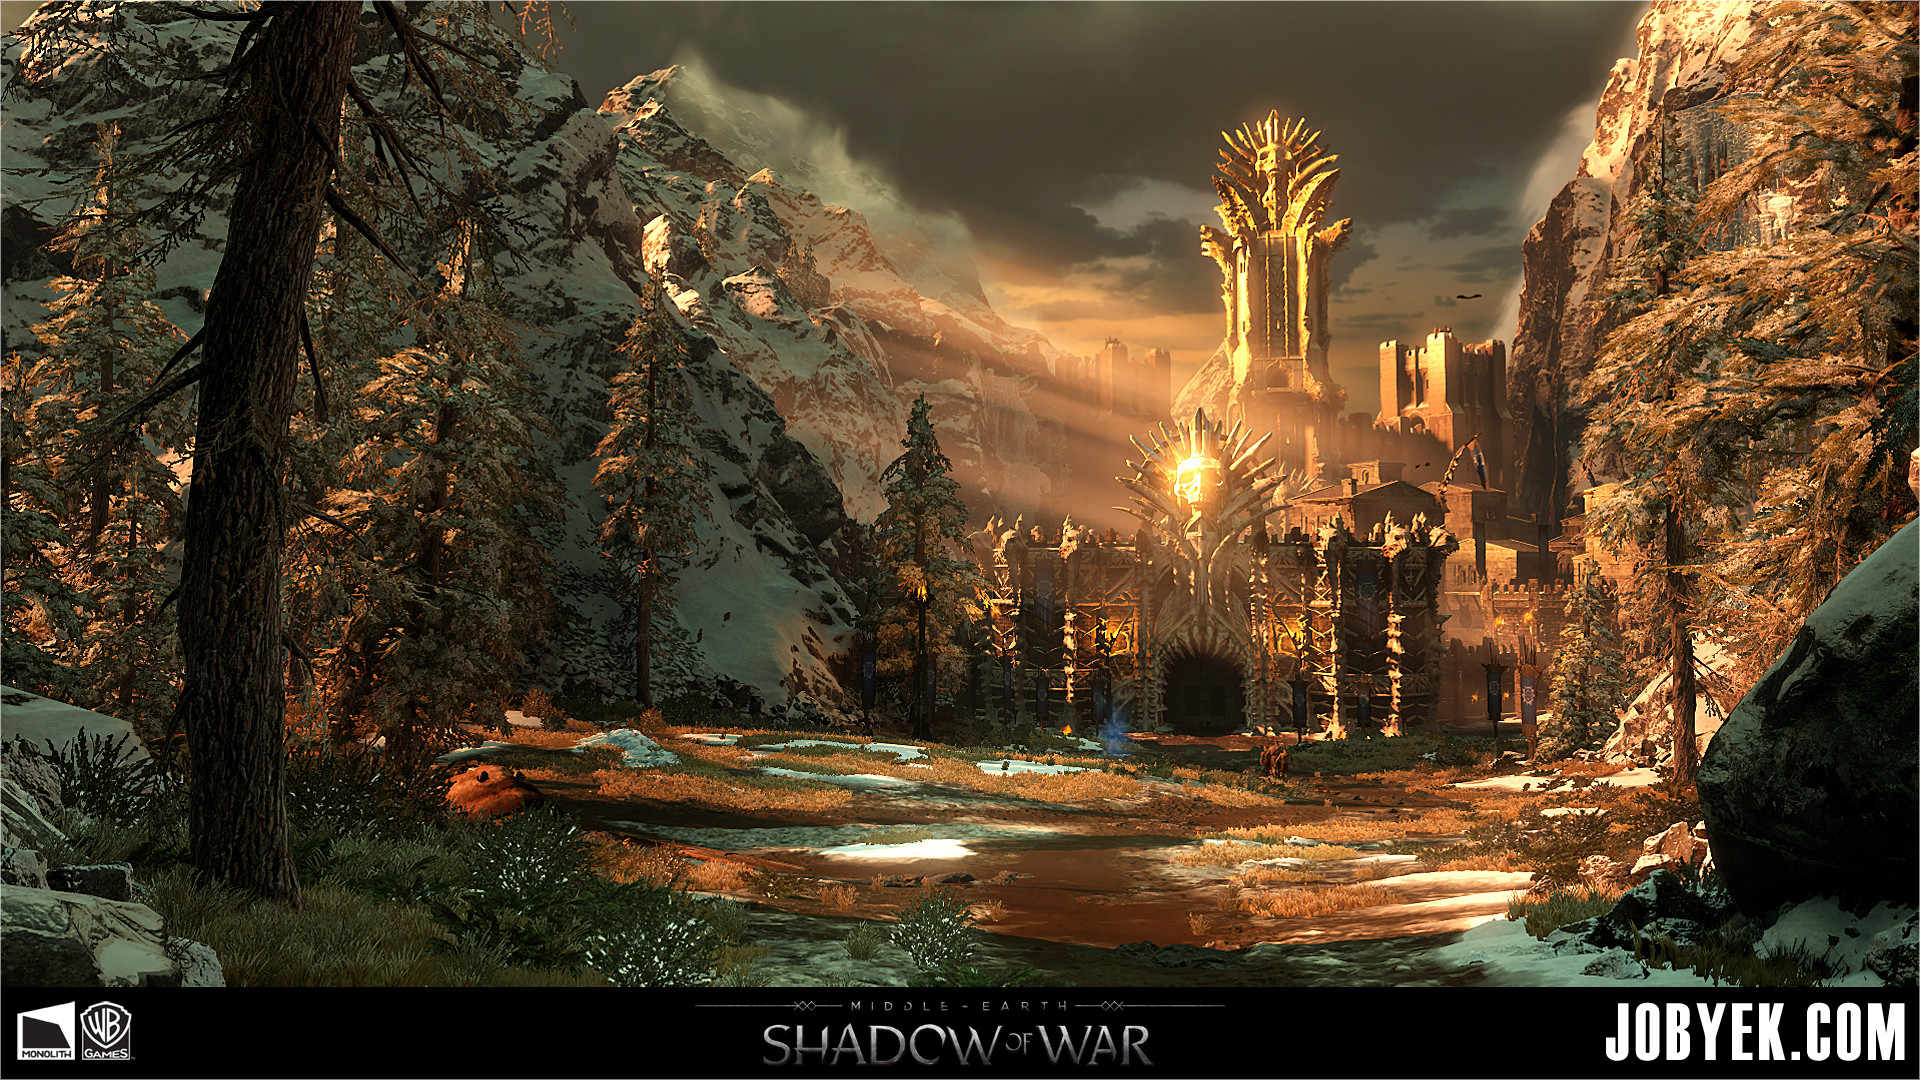 Middle-earth: Shadow of War Concept Art by George Rushing